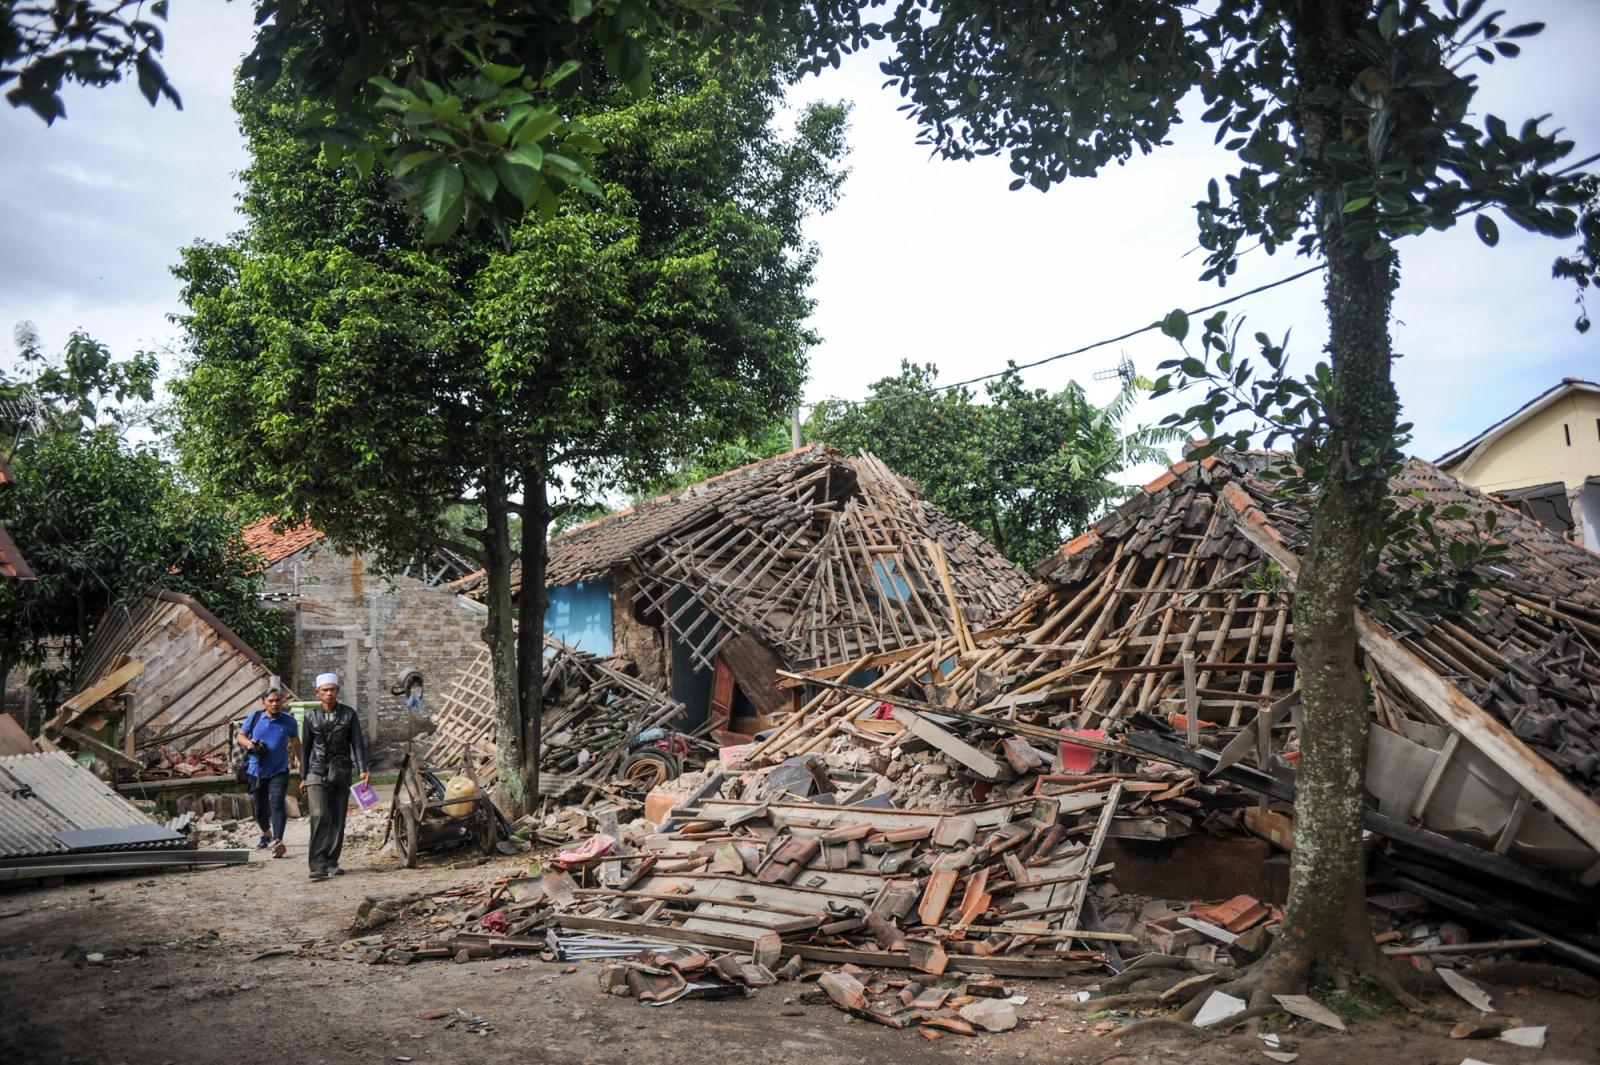 Locals walk past collapsed houses after an earthquake in Cianjur, West Java province, Indonesia, November 22, 2022.